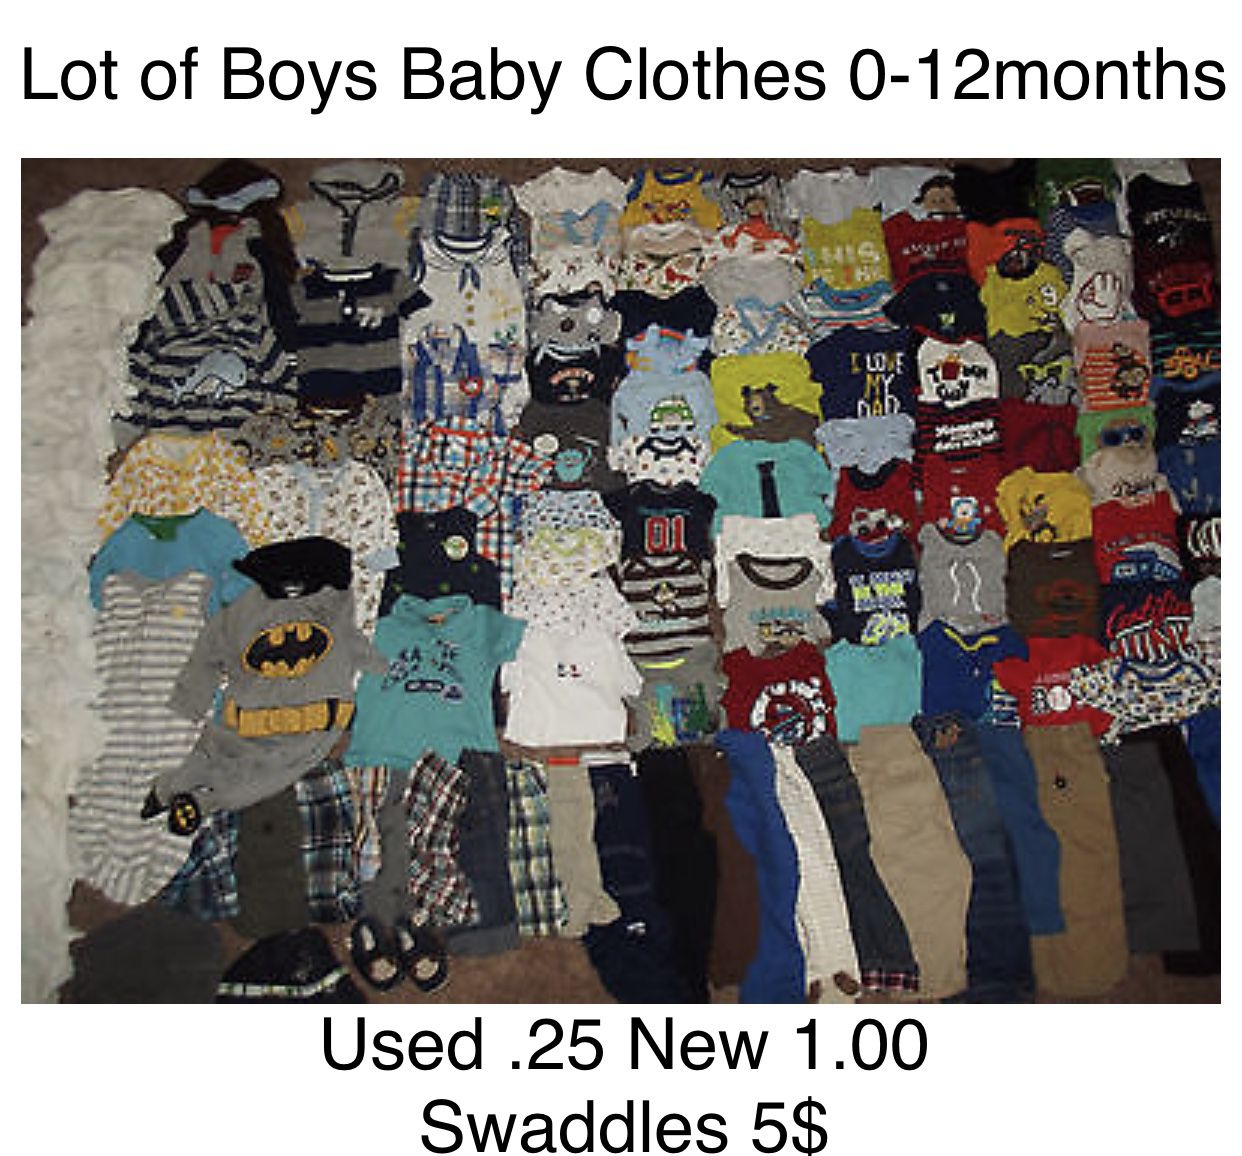 Baby clothes .25 used 1.00 new to 5$ swaddles